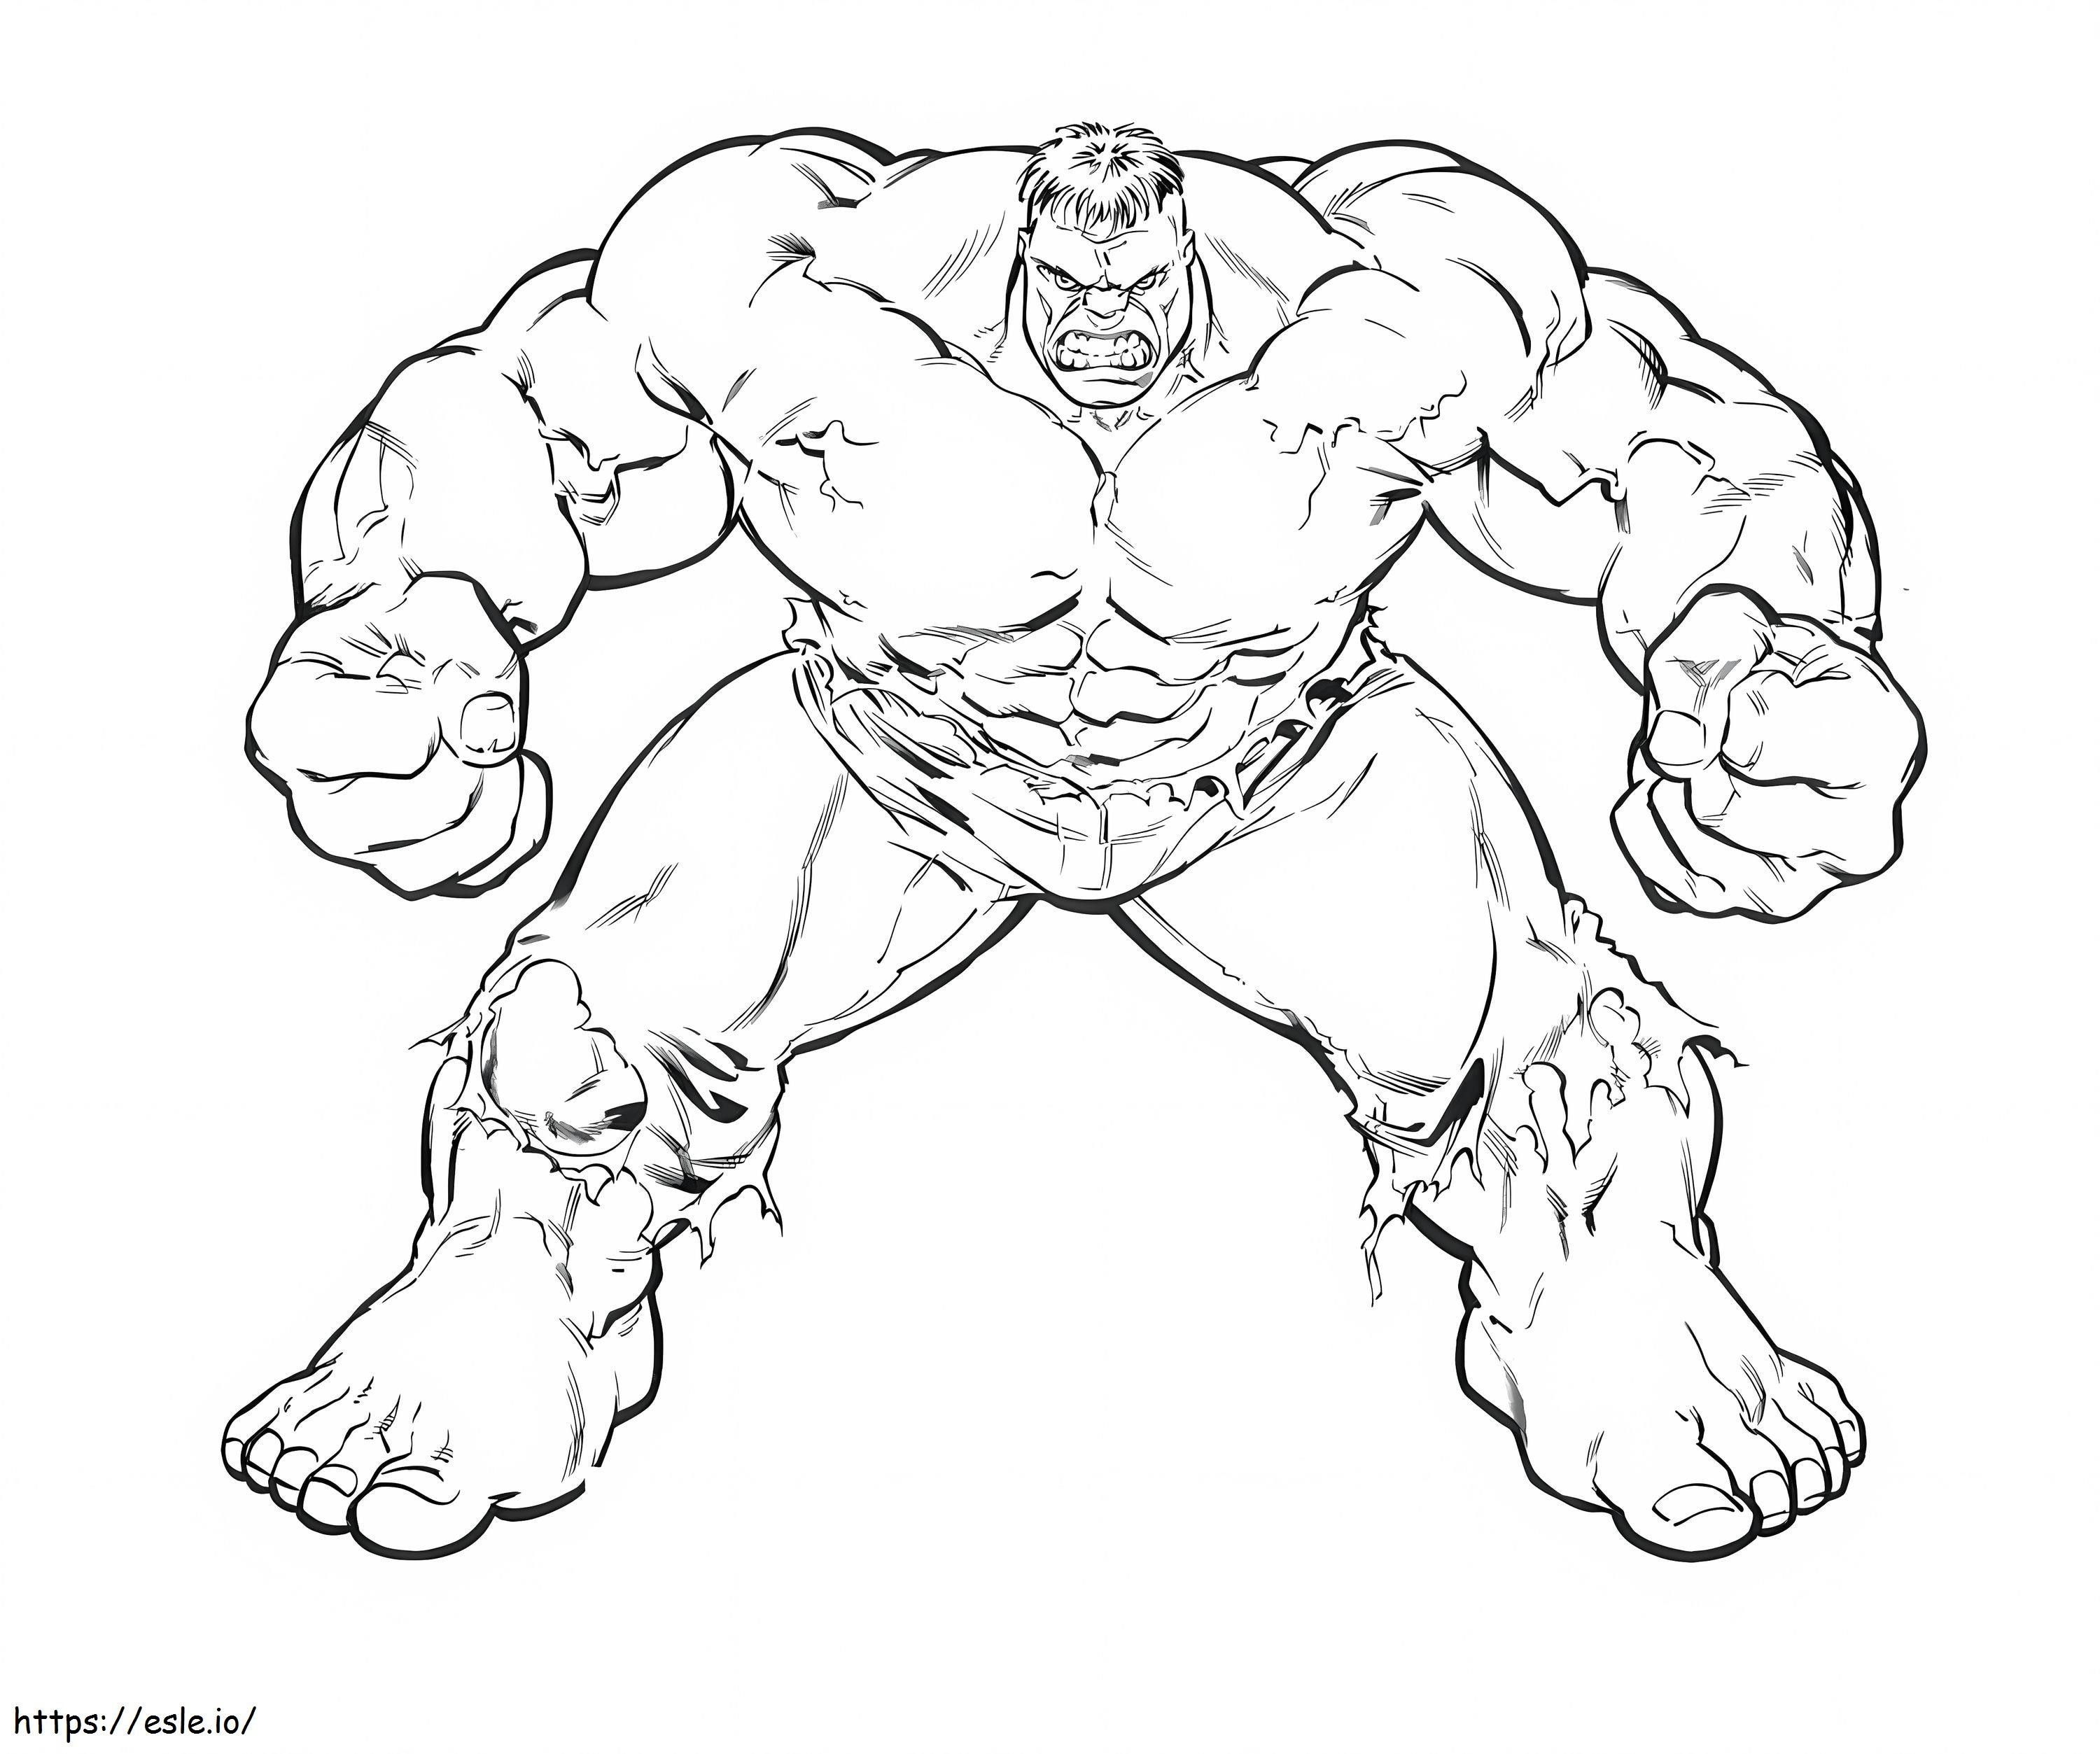 Red Hulk coloring page